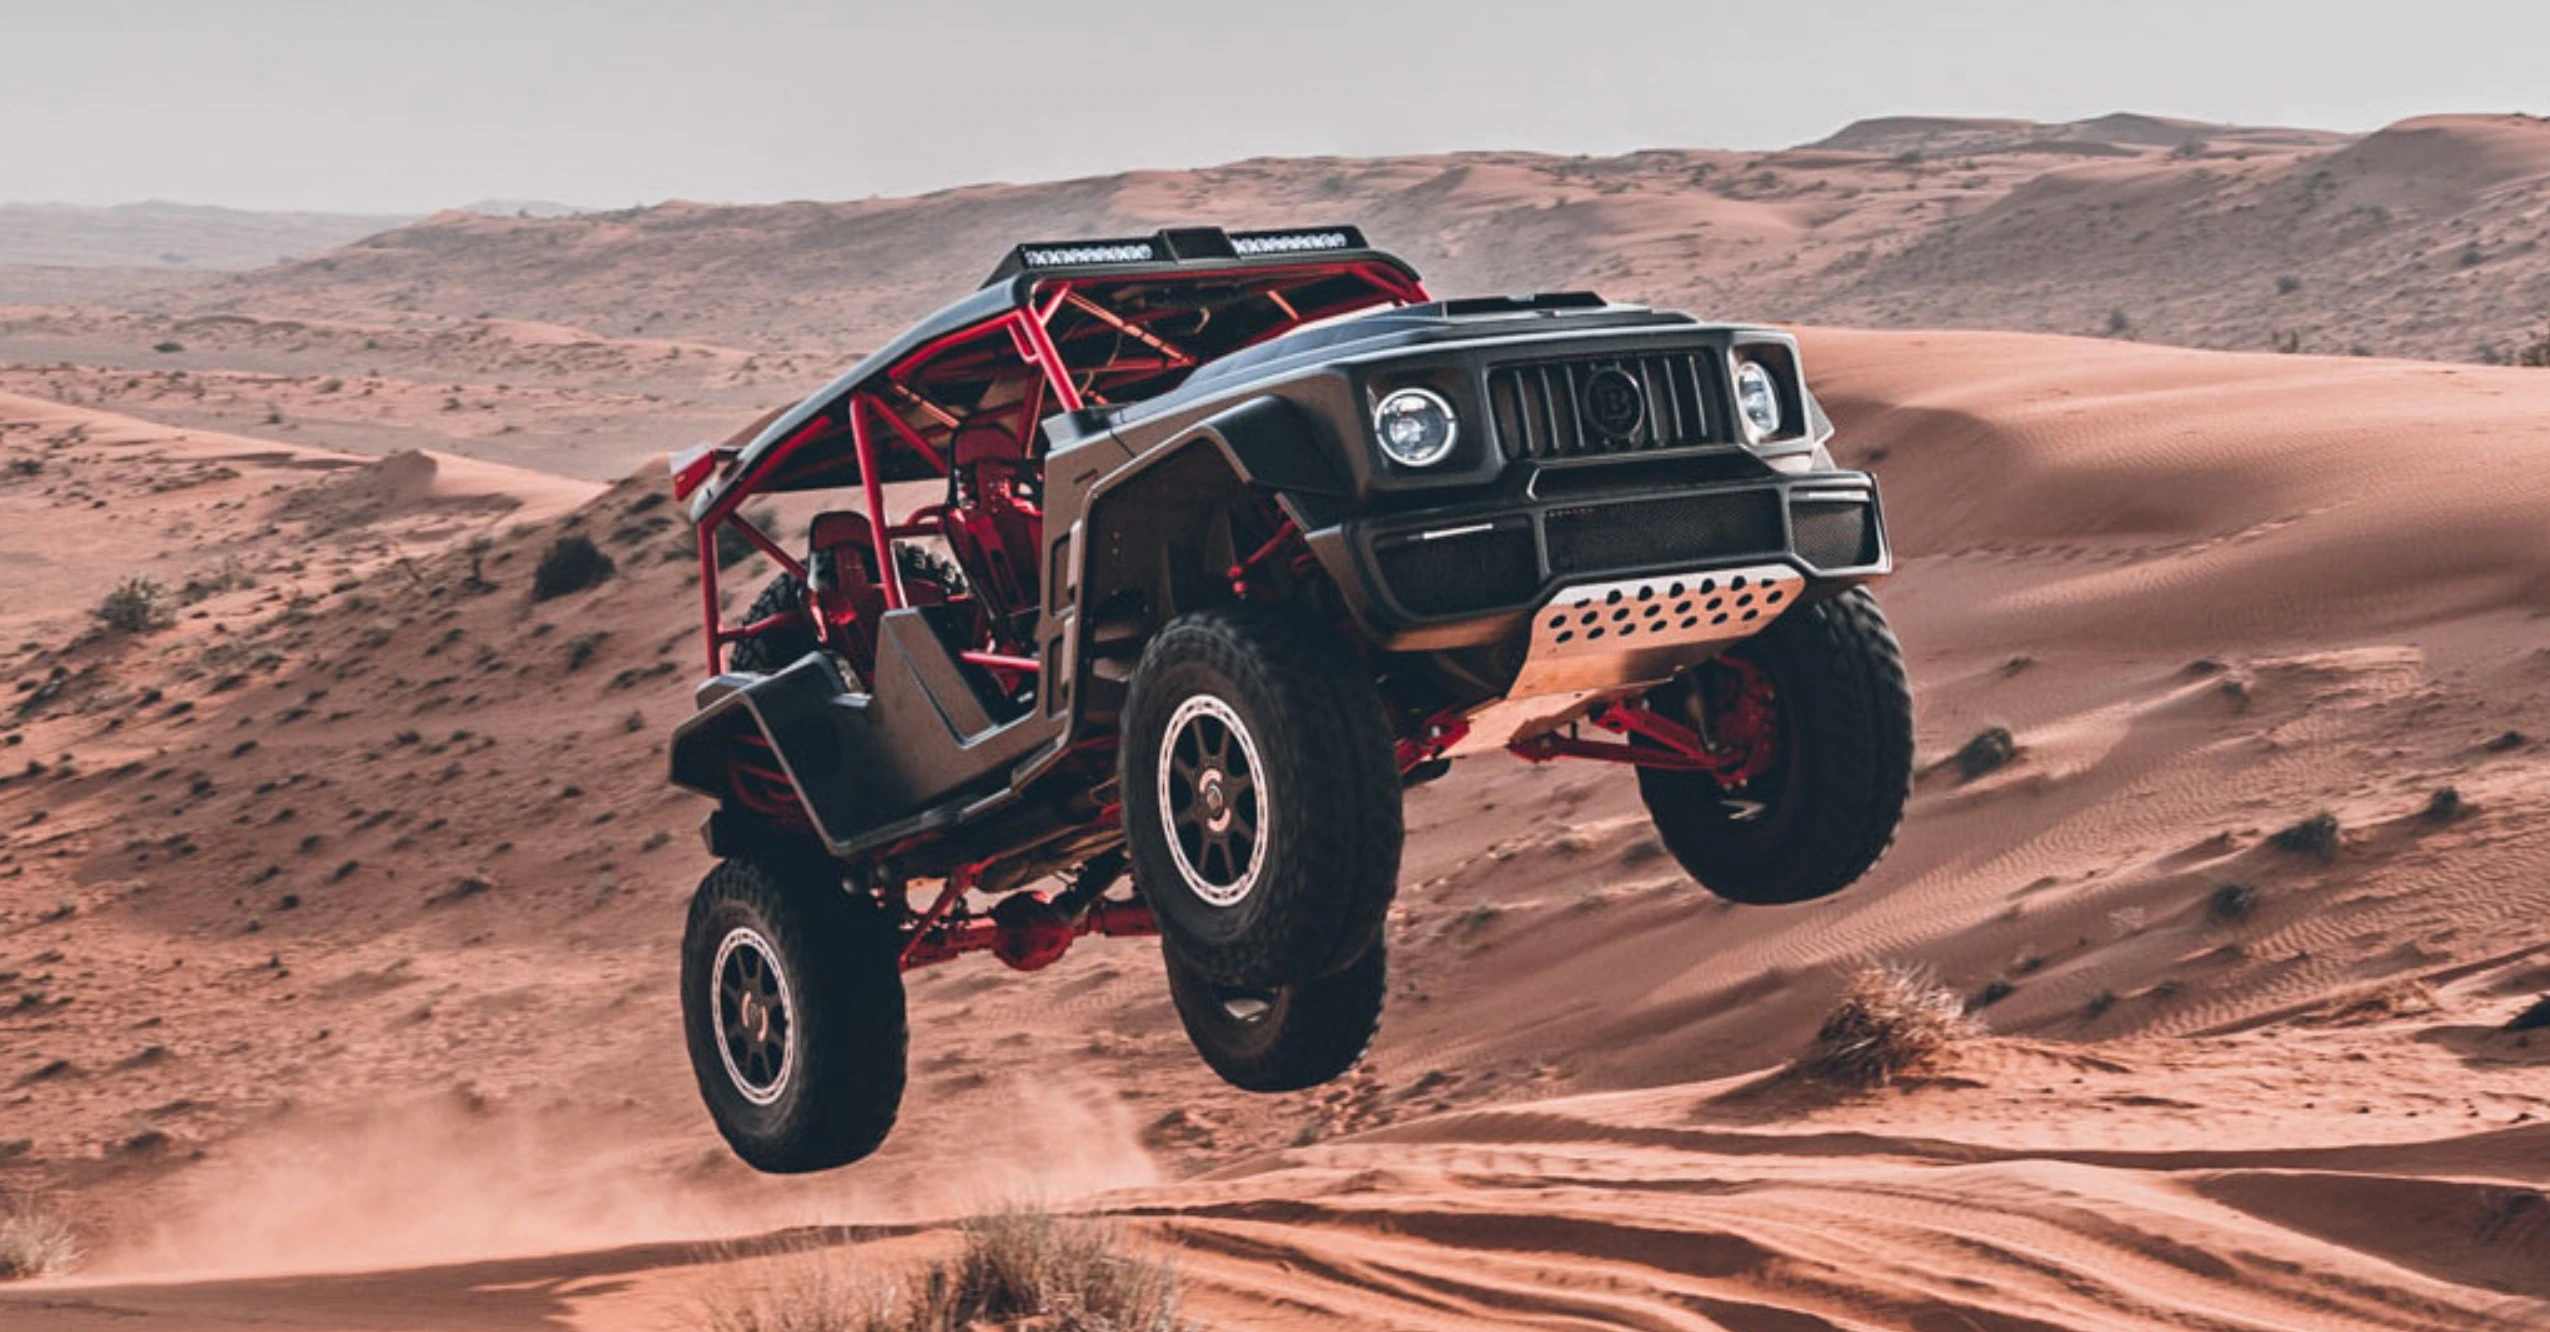 The Brabus 900 Crawler Is a 900-HP, AMG-Powered Dune Buggy